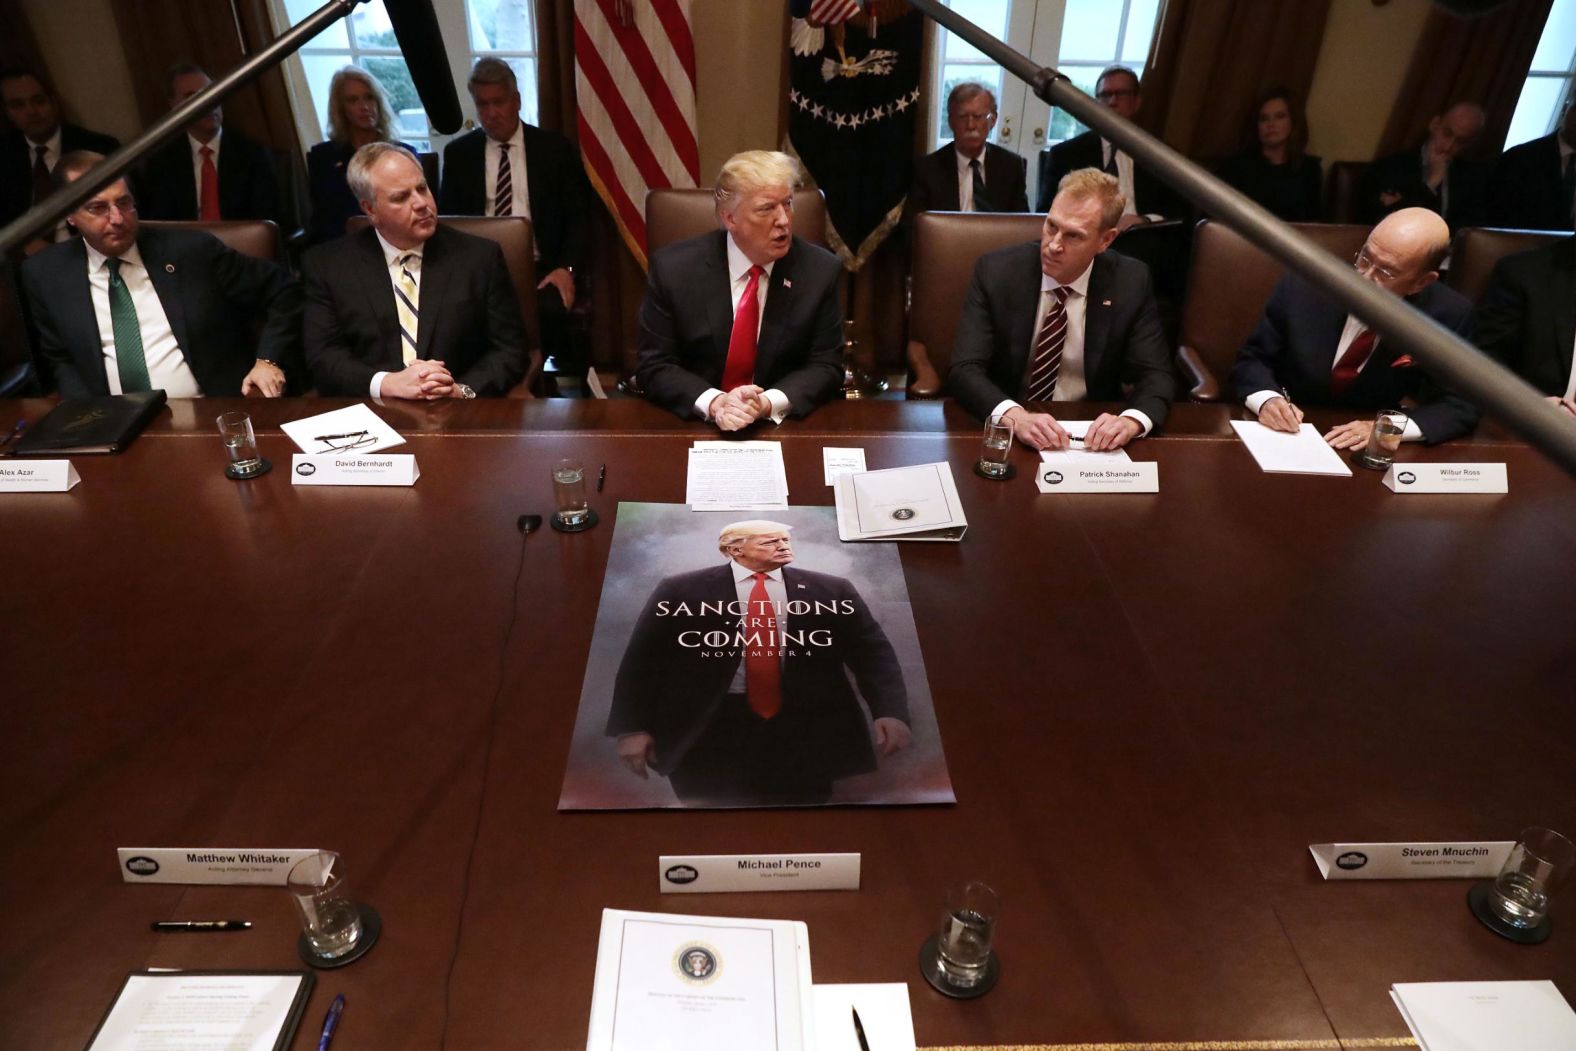 A "Game of Thrones"-style poster <a href="https://www.cnn.com/videos/politics/2019/01/03/donald-trump-game-of-thrones-cabinet-meeting-moos-pkg-ebof-vpx.cnn" target="_blank">sits in front of the President</a> as he meets with Cabinet members at the White House on January 2. While cameras were rolling, the President made no reference to the poster, <a href="https://www.cnn.com/2018/11/02/entertainment/hbo-trump-game-of-thrones/index.html" target="_blank">which we first saw in November.</a>